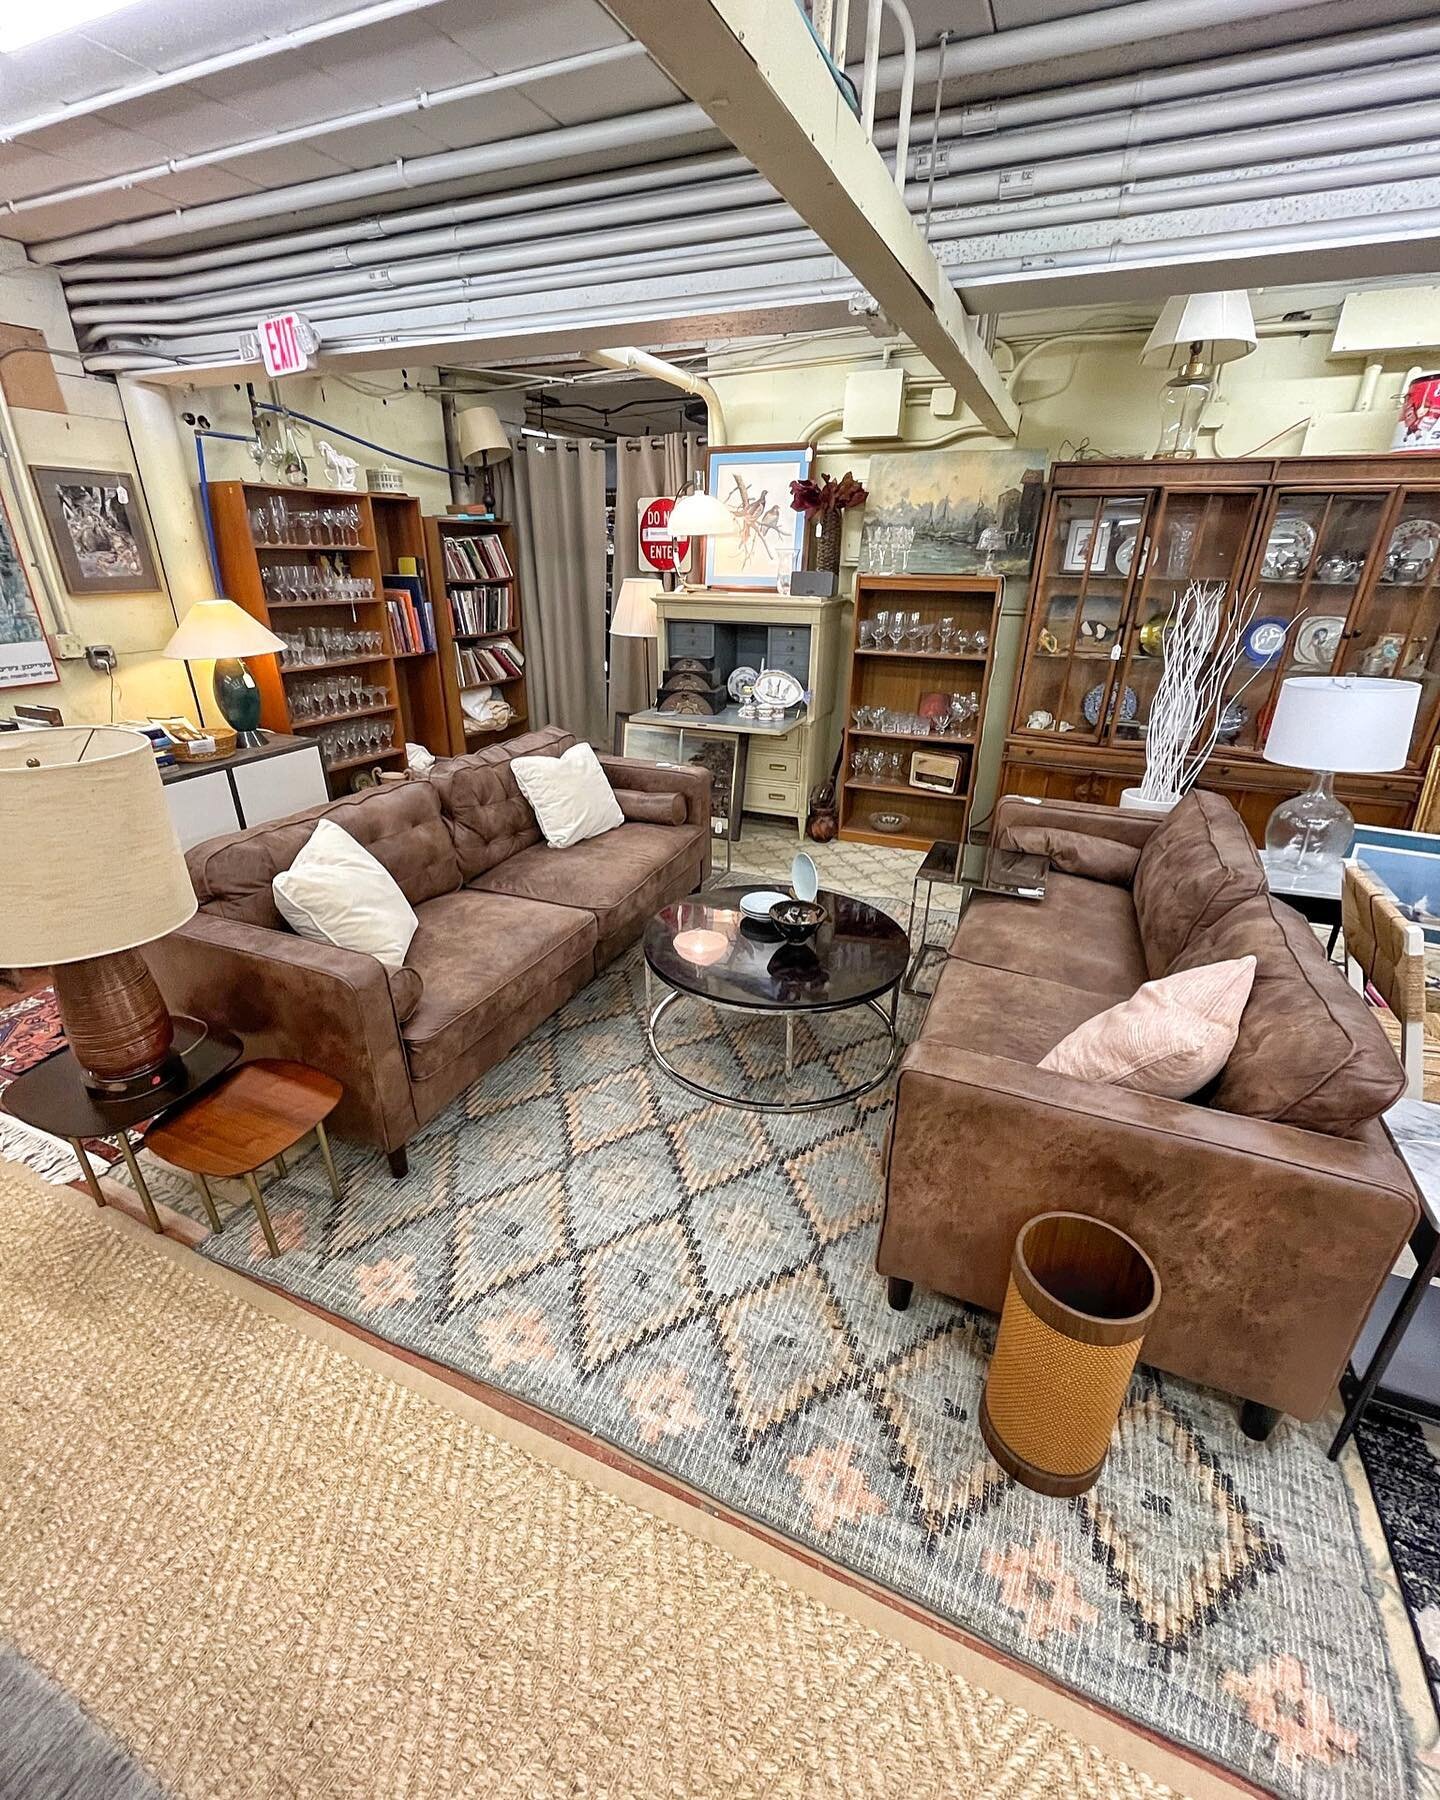 🛋️ double the fun with matching sofas 👏 @cb2 coffee table, &amp; more ➡️ here from 12-5pm today and tomorrow 🥳
.
.
#cb2 #sofa #couches #massachusetts_igers #bostonfurniture #bostonthrift #newenglandhome #thriftstorefinds #rugsofinstagram #thrifted